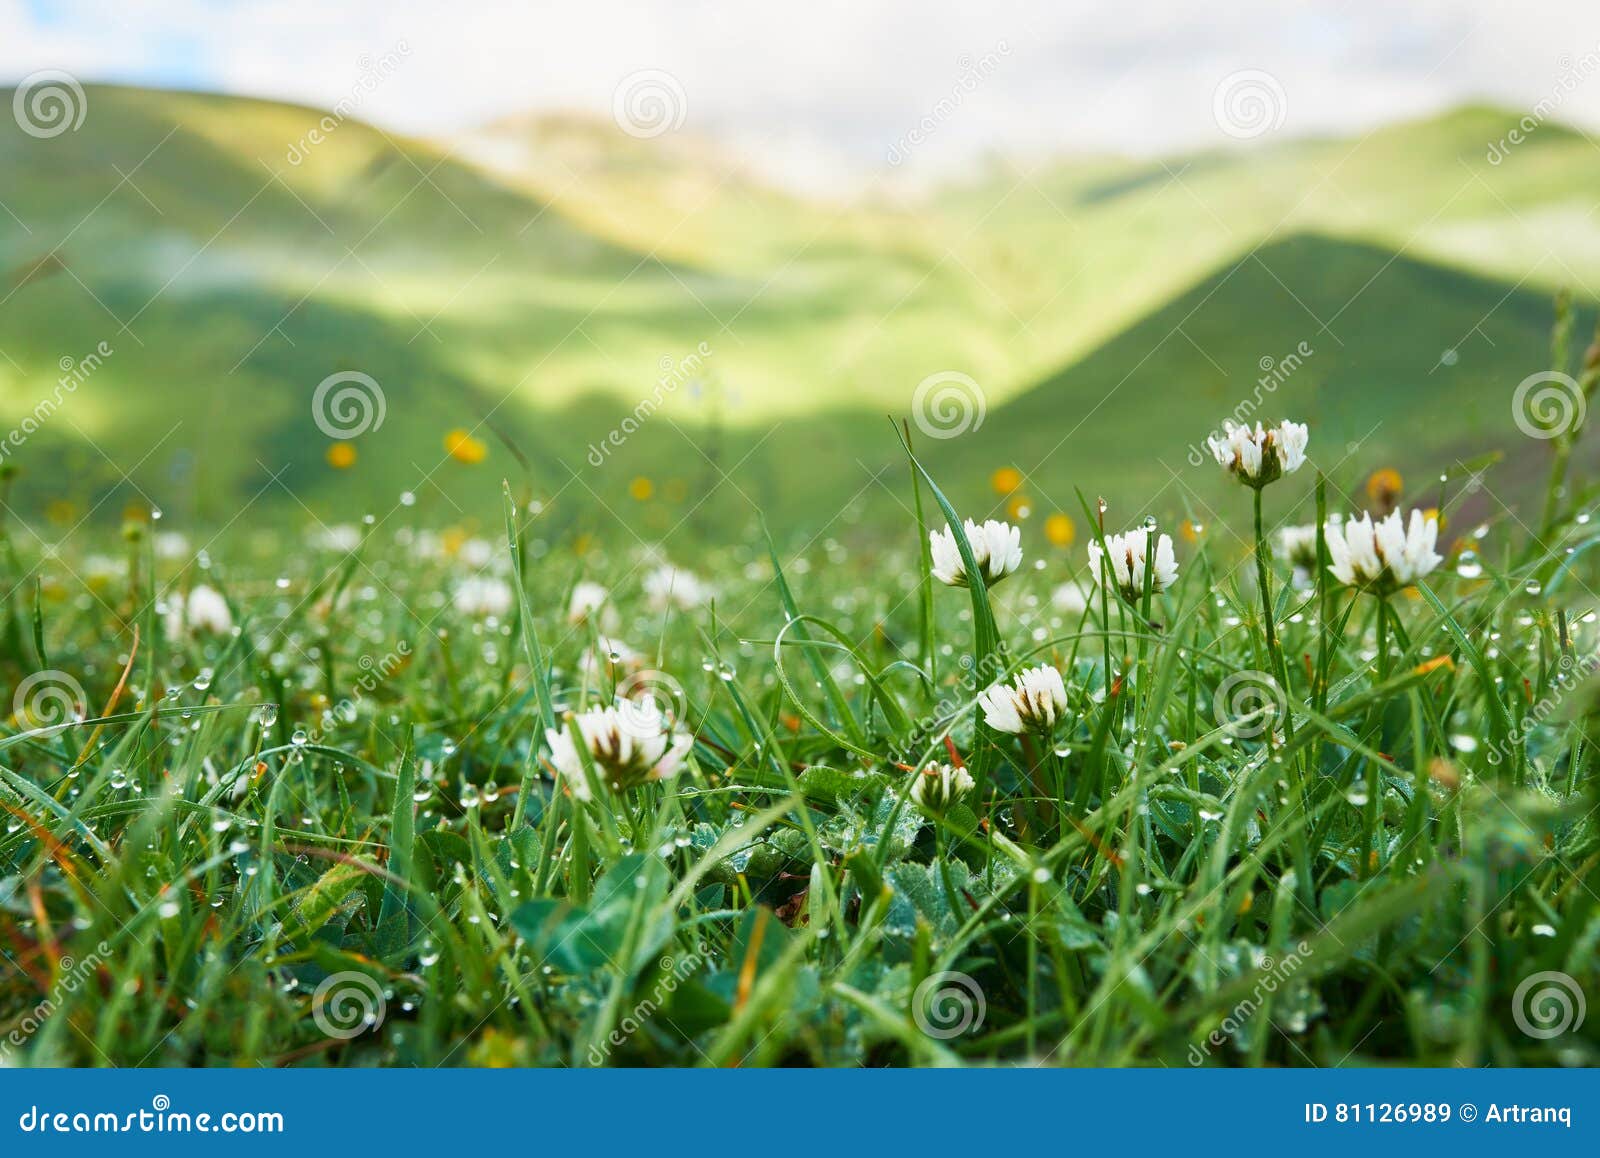 white clover flowers in the grass with dew early morning